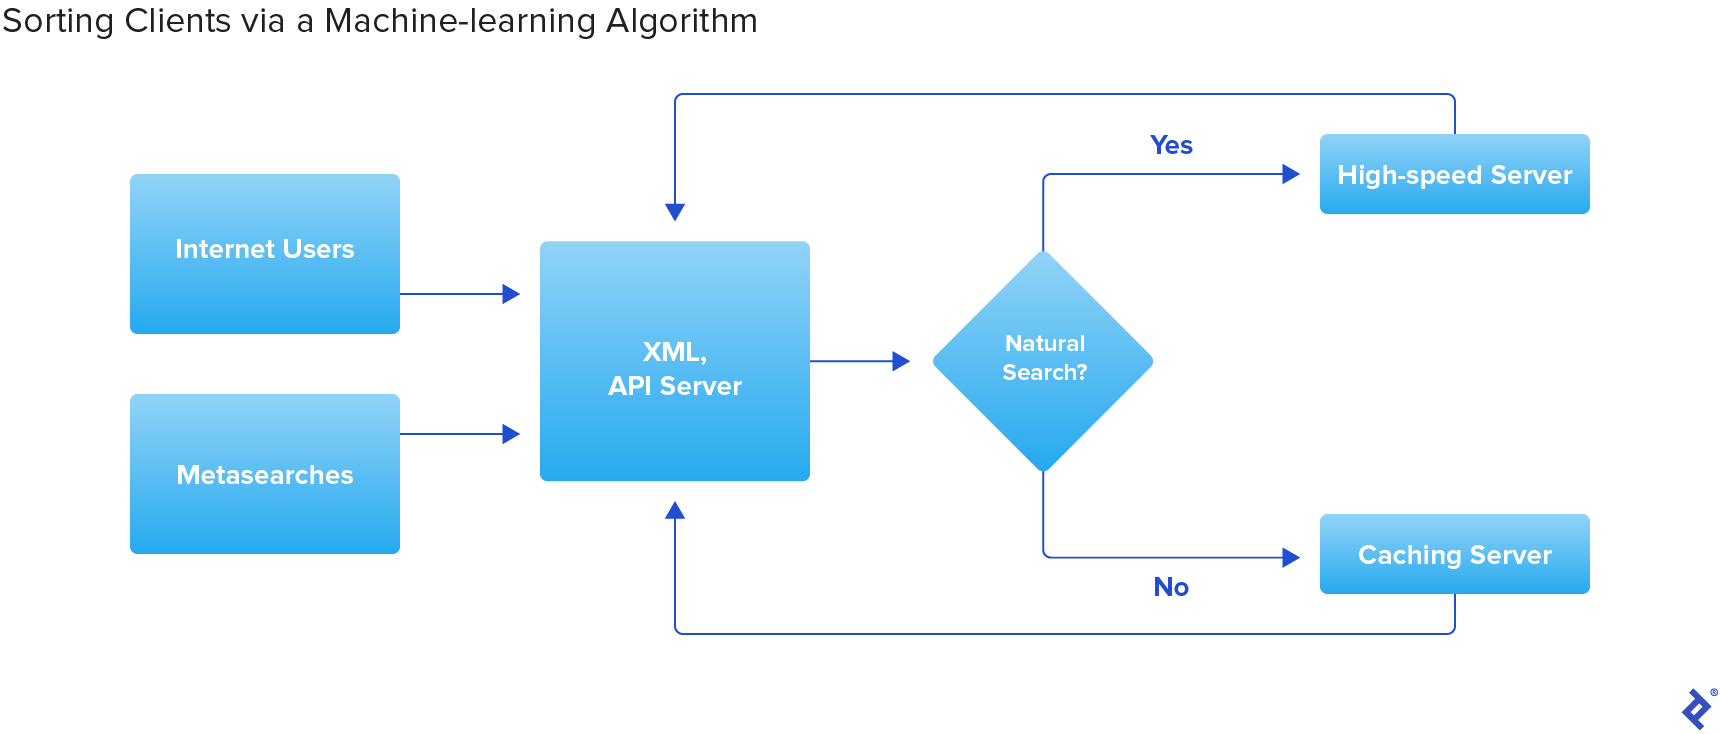 An illustration titled “Sorting Clients via a Machine-learning Algorithm.” This illustration is a flowchart showing the possible paths by which requests are sorted depending on their point of origin. The beginning of the flowchart has two possible origins, “Internet Users” and “Metasearches.” Both lead to “XML, API Server.” This leads to “Natural Search?” If the result is “Yes,” the next step is “High-speed Server.” If the result is “No,” the next step is “Caching Server.” After this, both are led back to “XML, API Server.”